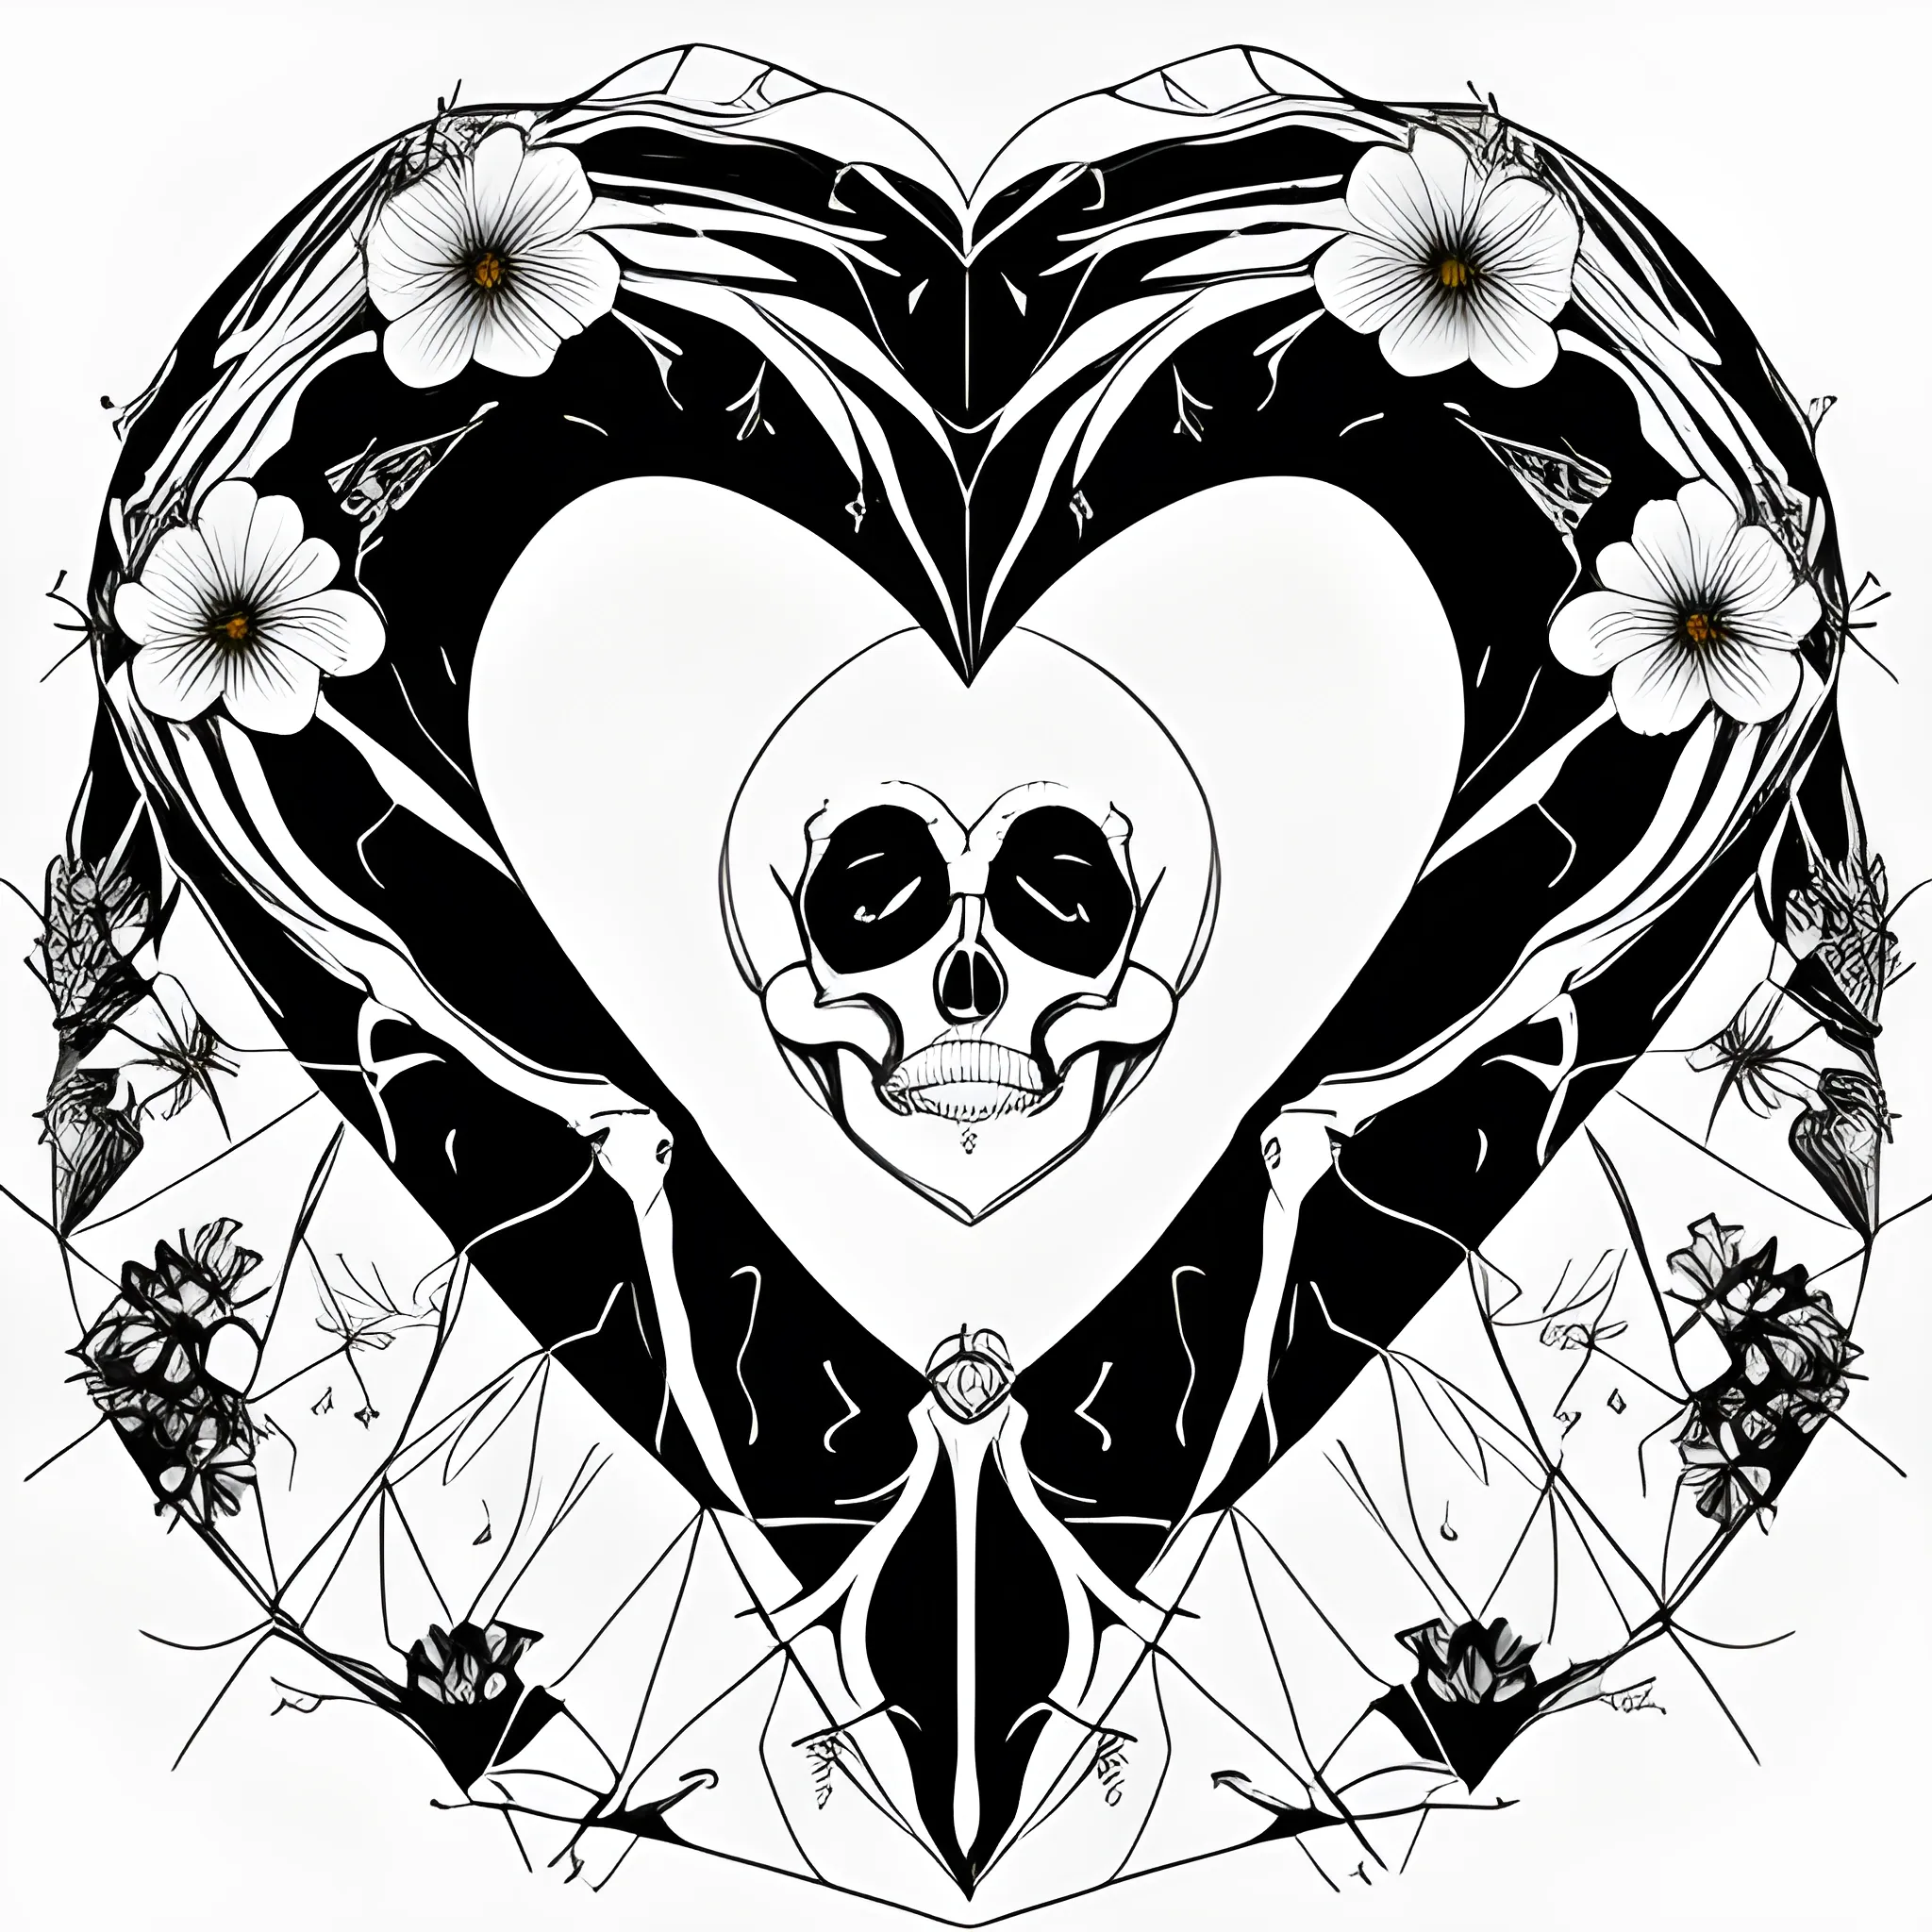 “Design a vector image that artistically represents a human skeleton with a heart at its center, depicted as if it’s bleeding. Surround the heart and skeleton with an array of intertwining flowers, adding a contrast of life and beauty to the composition. The entire image should be styled as a delicate pencil sketch, with attention to fine lines and shading to give depth and texture to the elements. Emphasize the interplay of anatomy and flora to create a striking, poignant piece.”